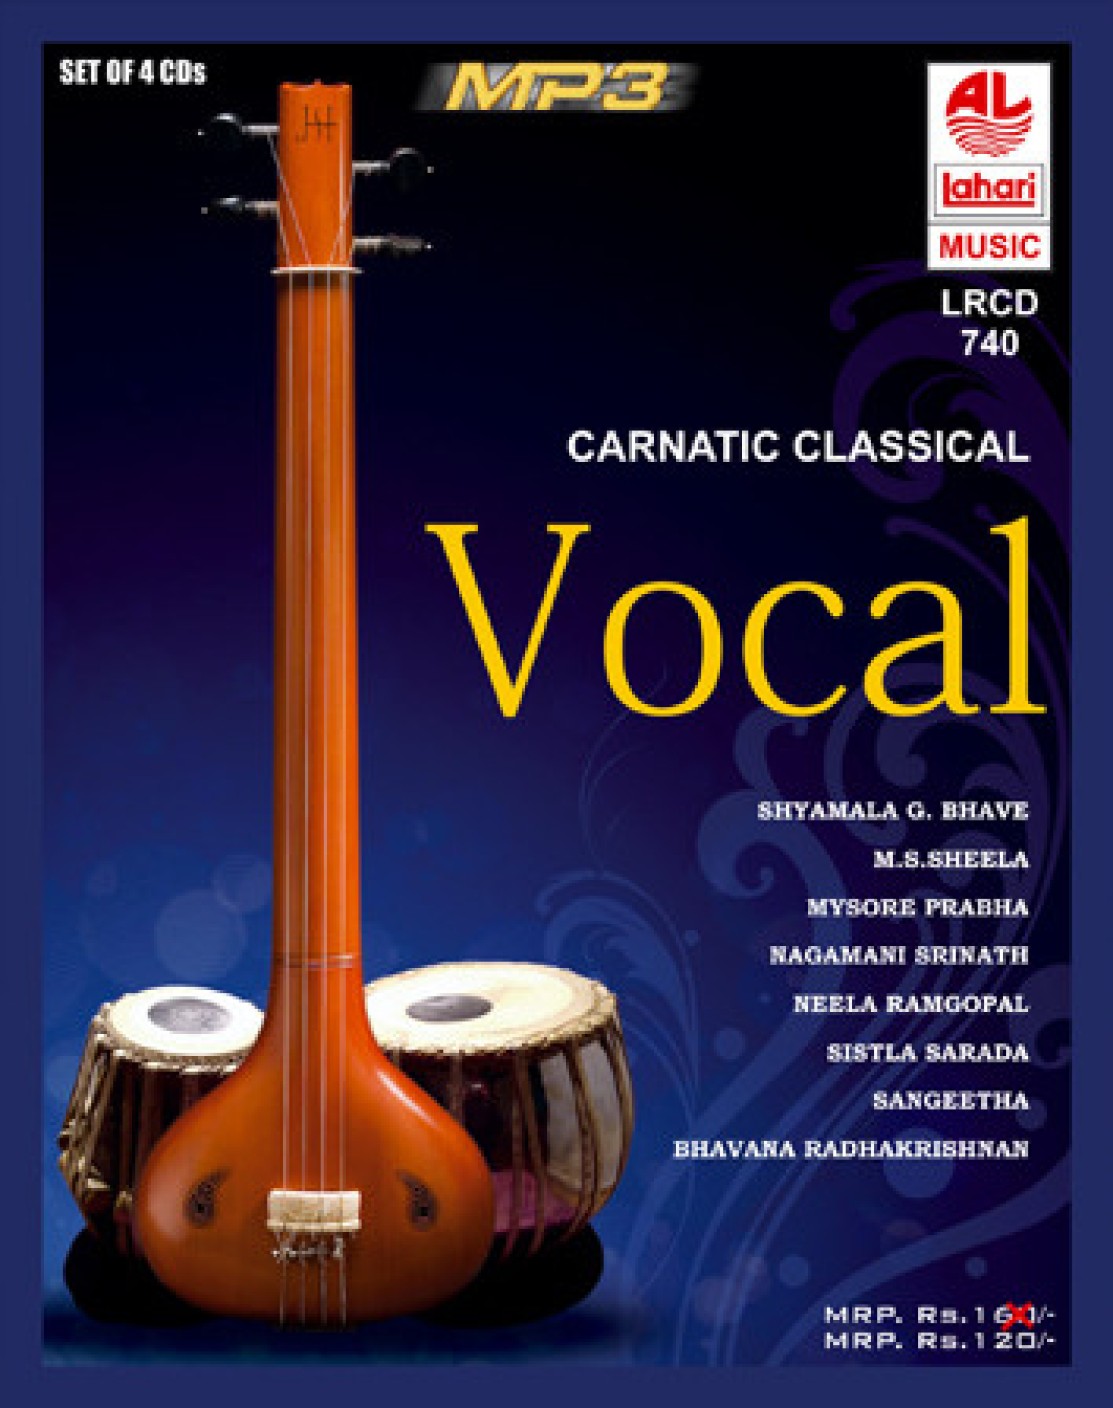 Carnatic Classical Vocal CD - 1 Music MP3 - Price In India. Buy